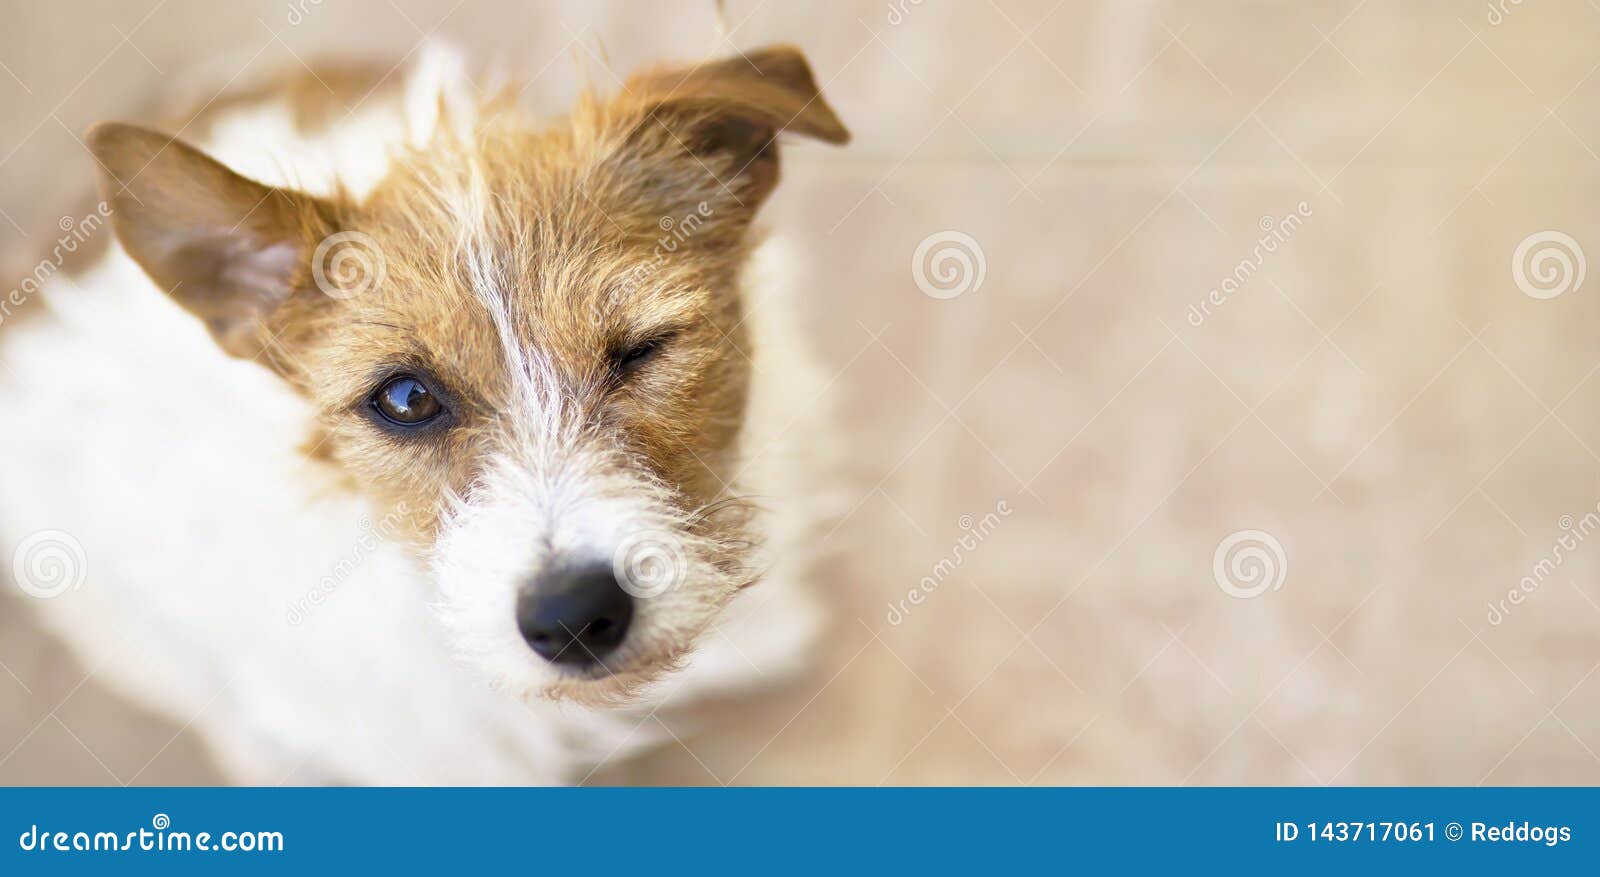 winking dog with funny ears as listening, web banner